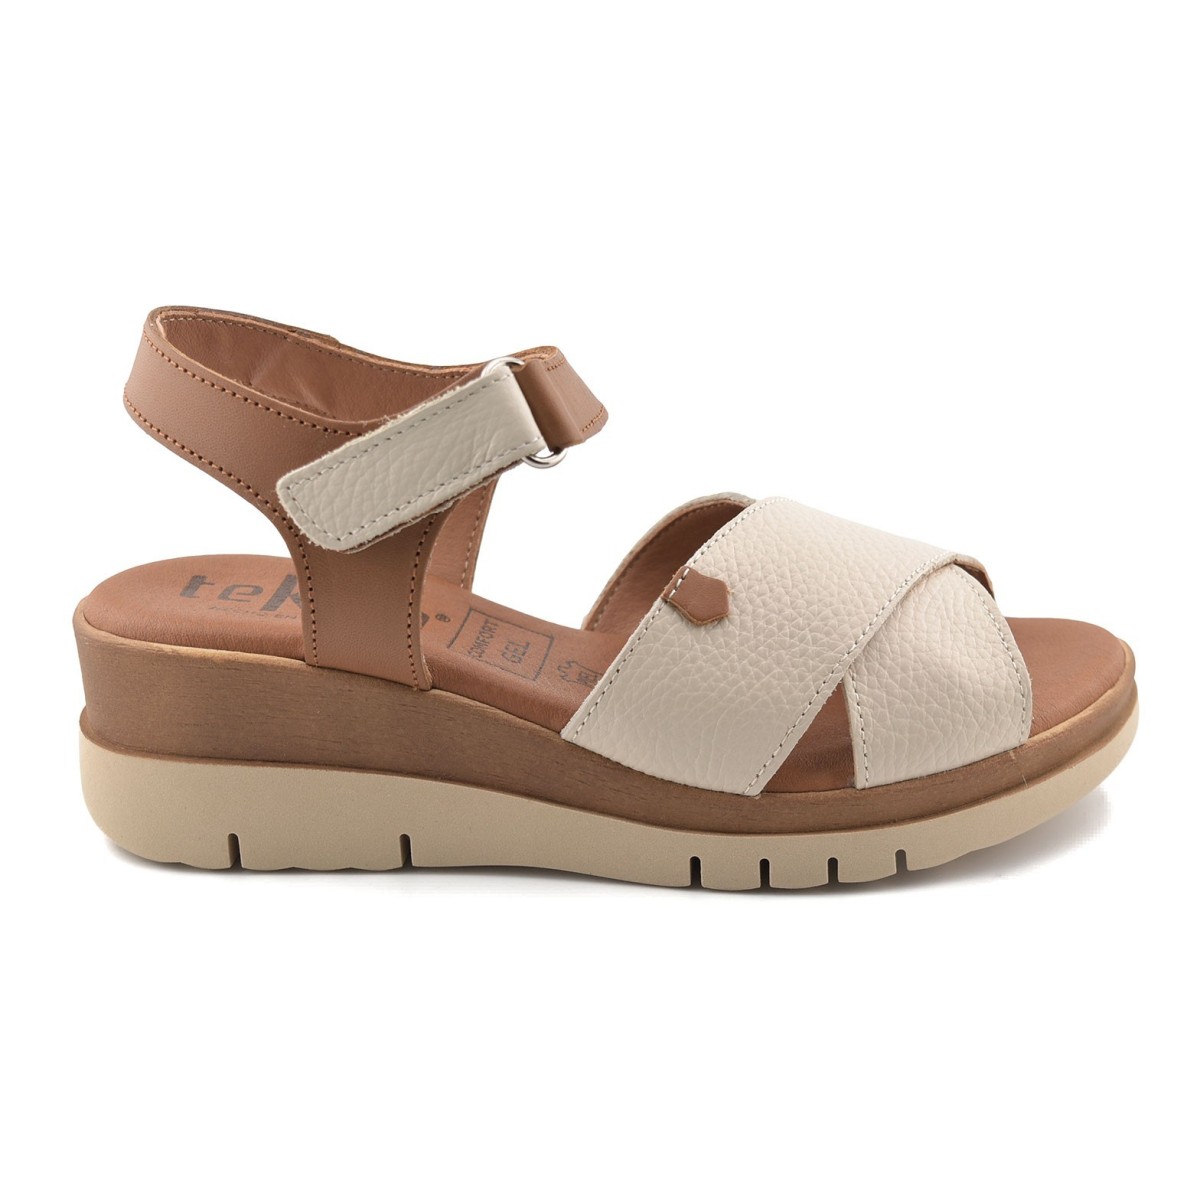 Beige leather sandals with wedge by Tekila